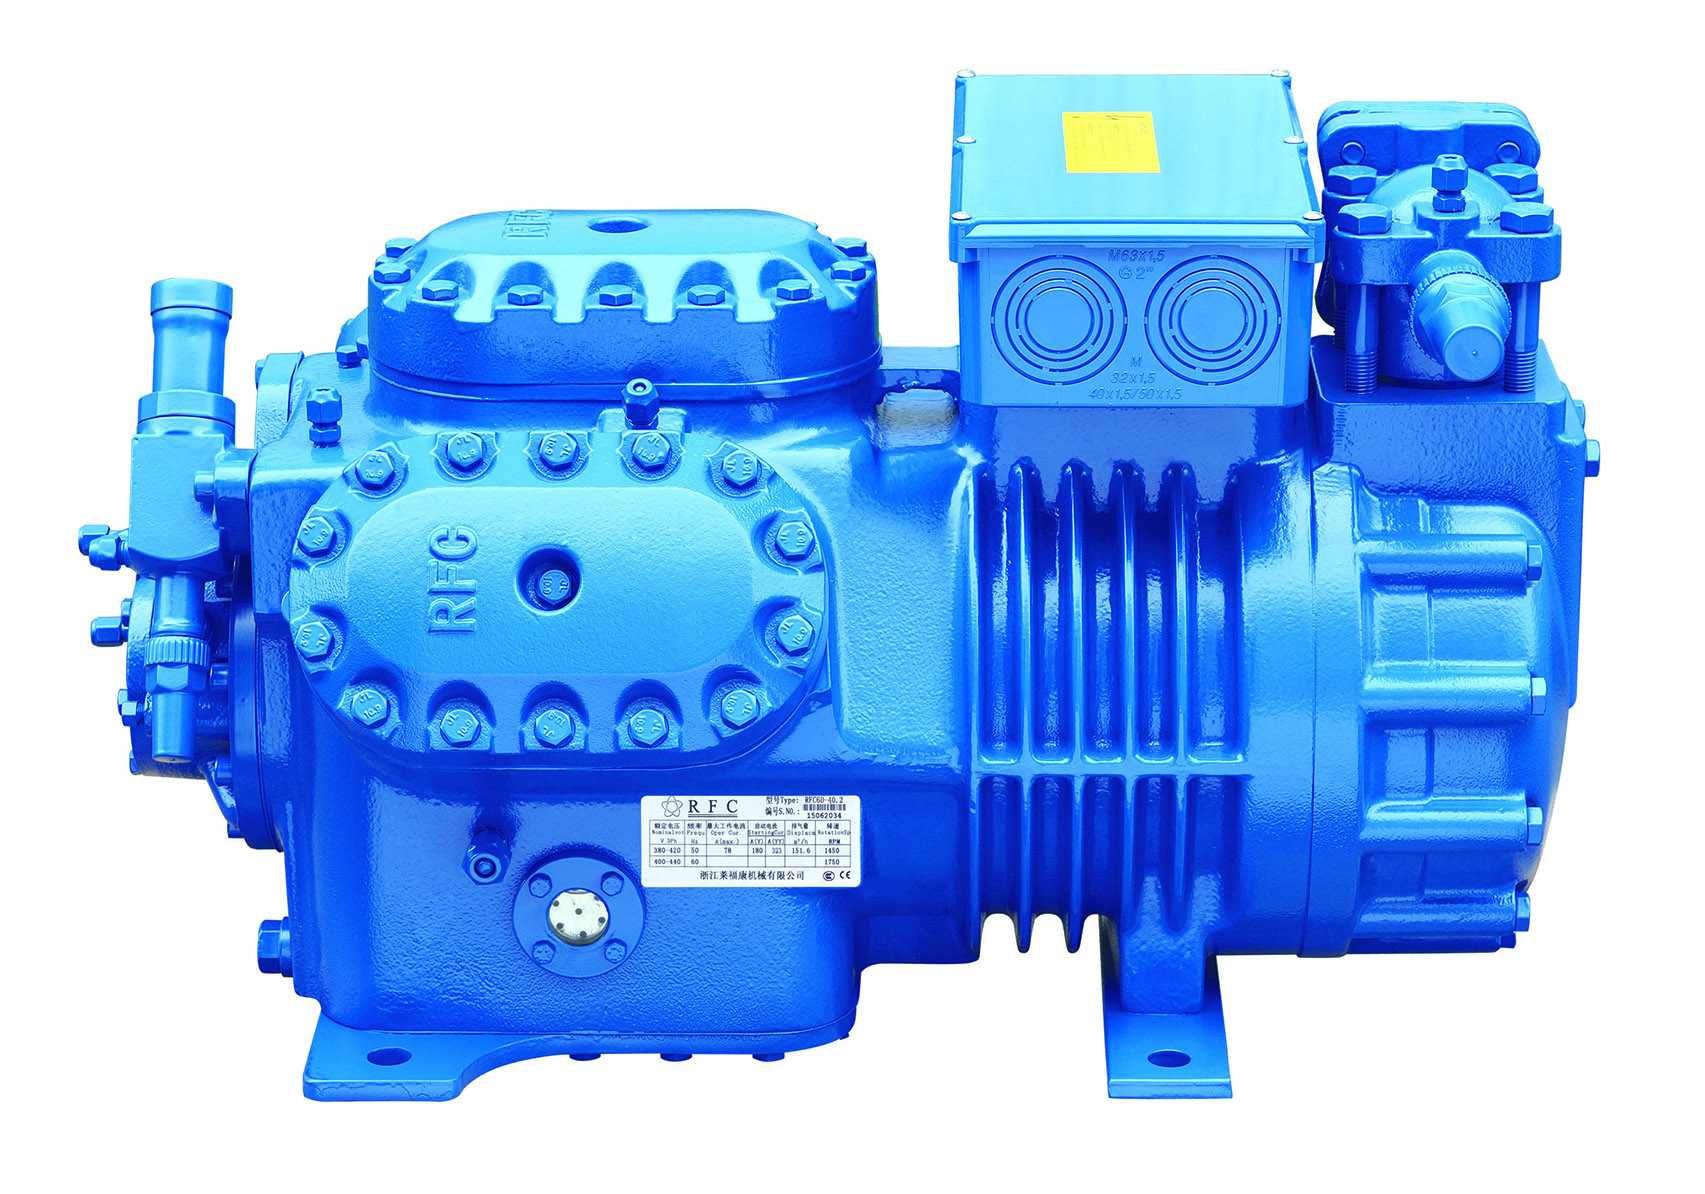 ec79caea Differences Between Rotary & Reciprocating Compressors